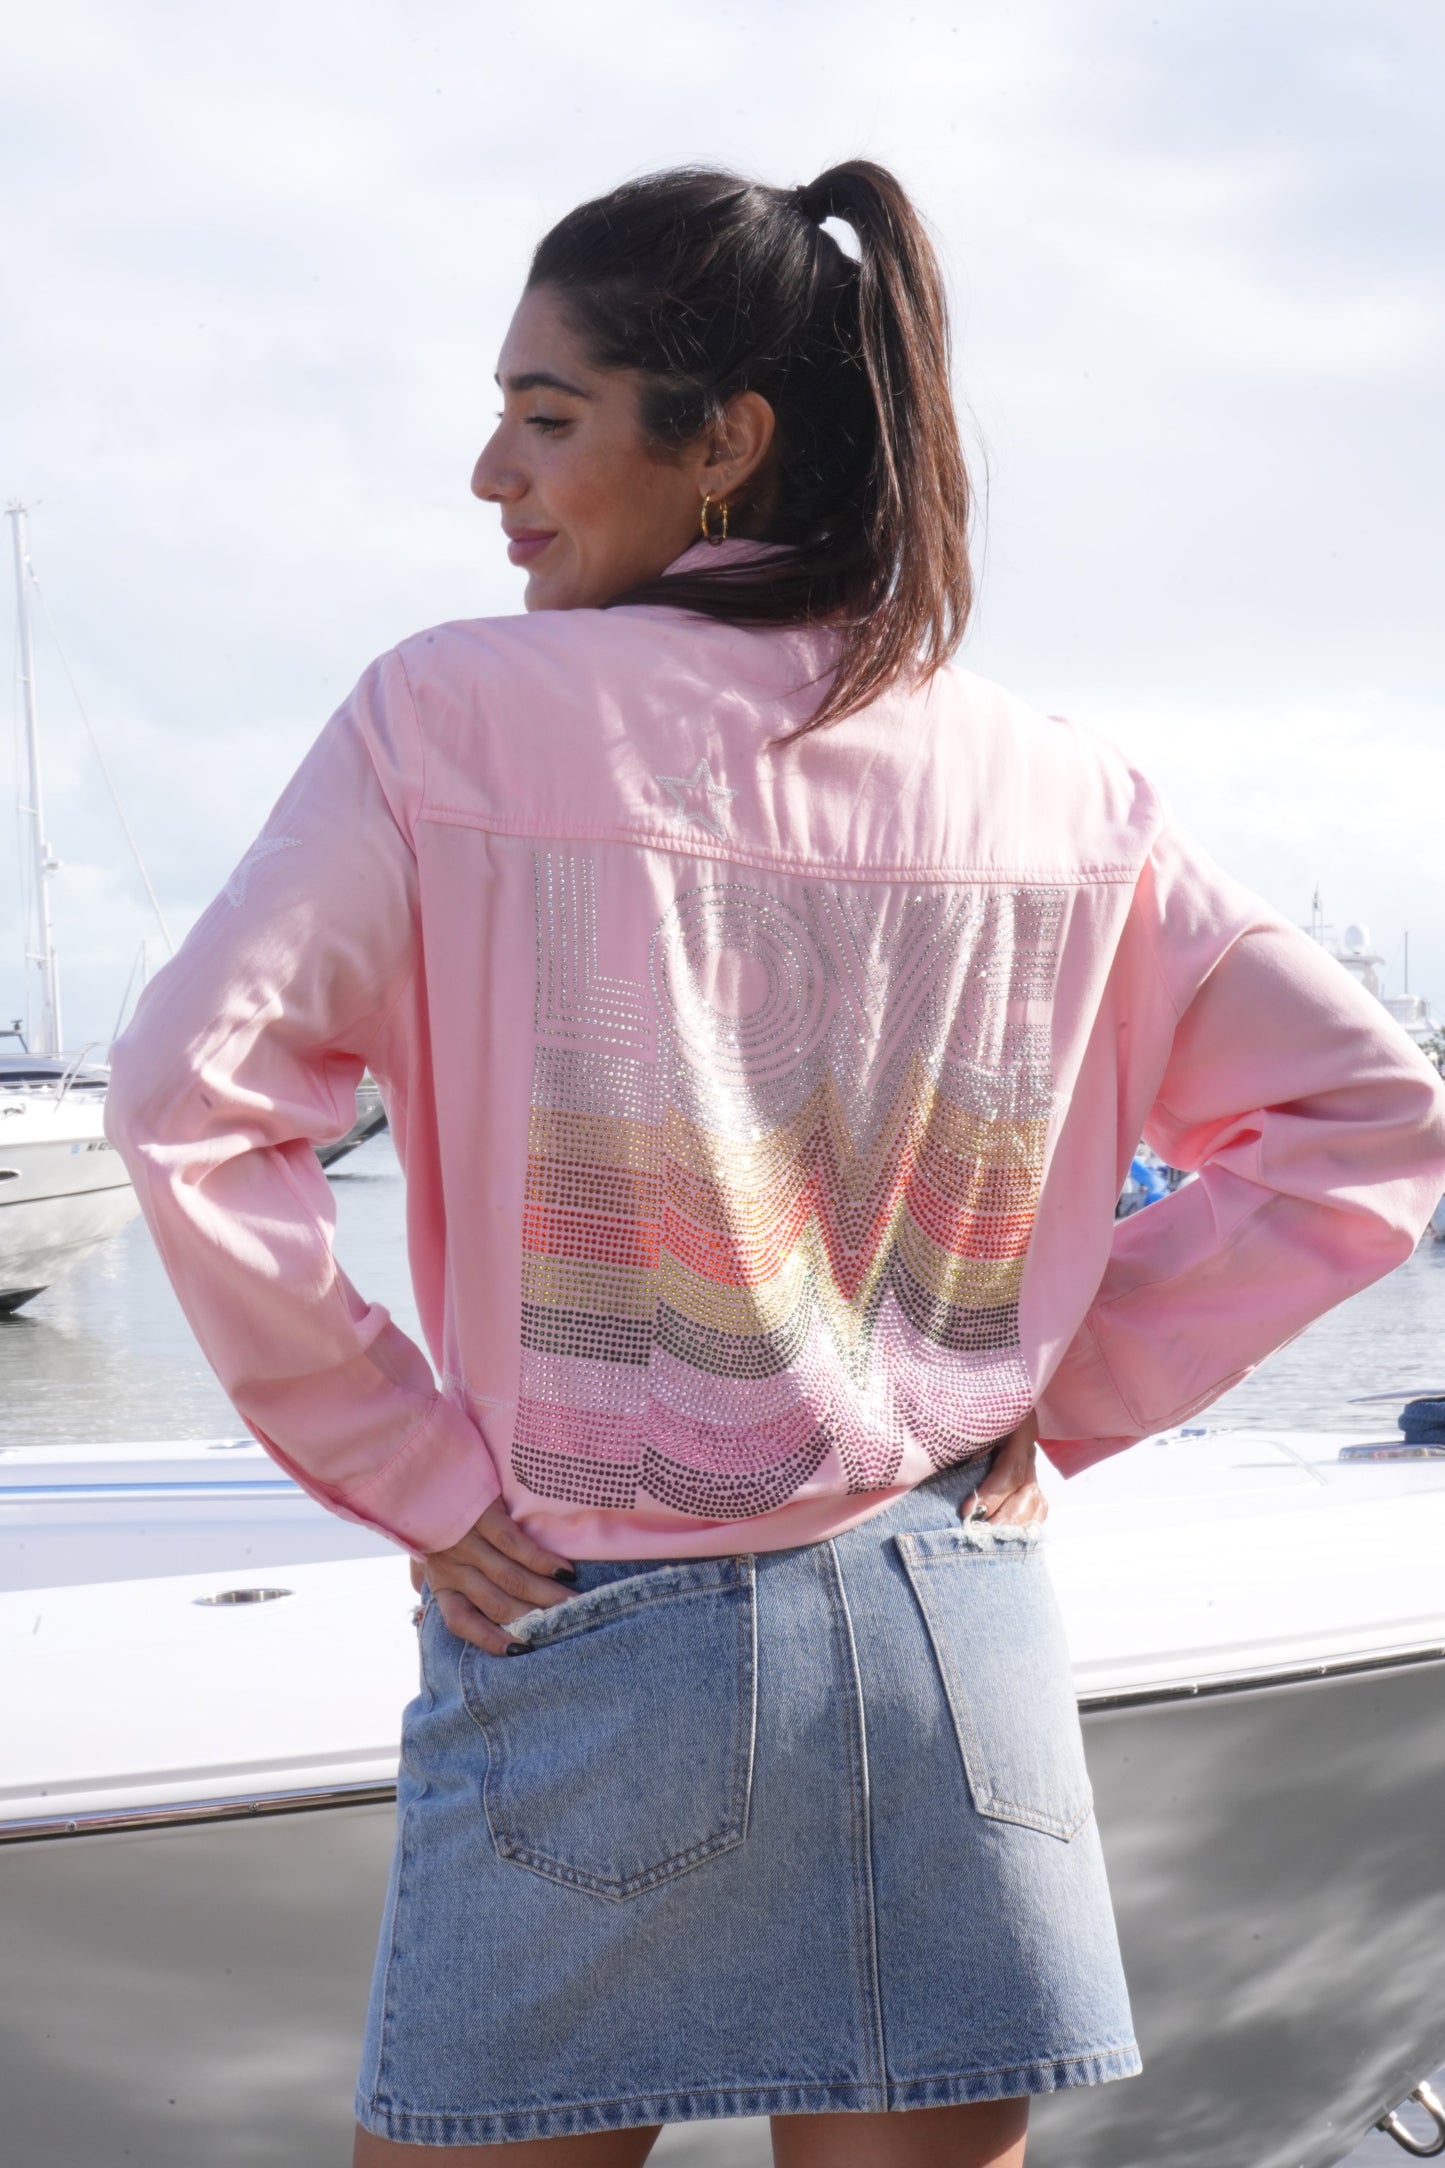 Shirt, Embroidered Star Light Pink, Love Repeater